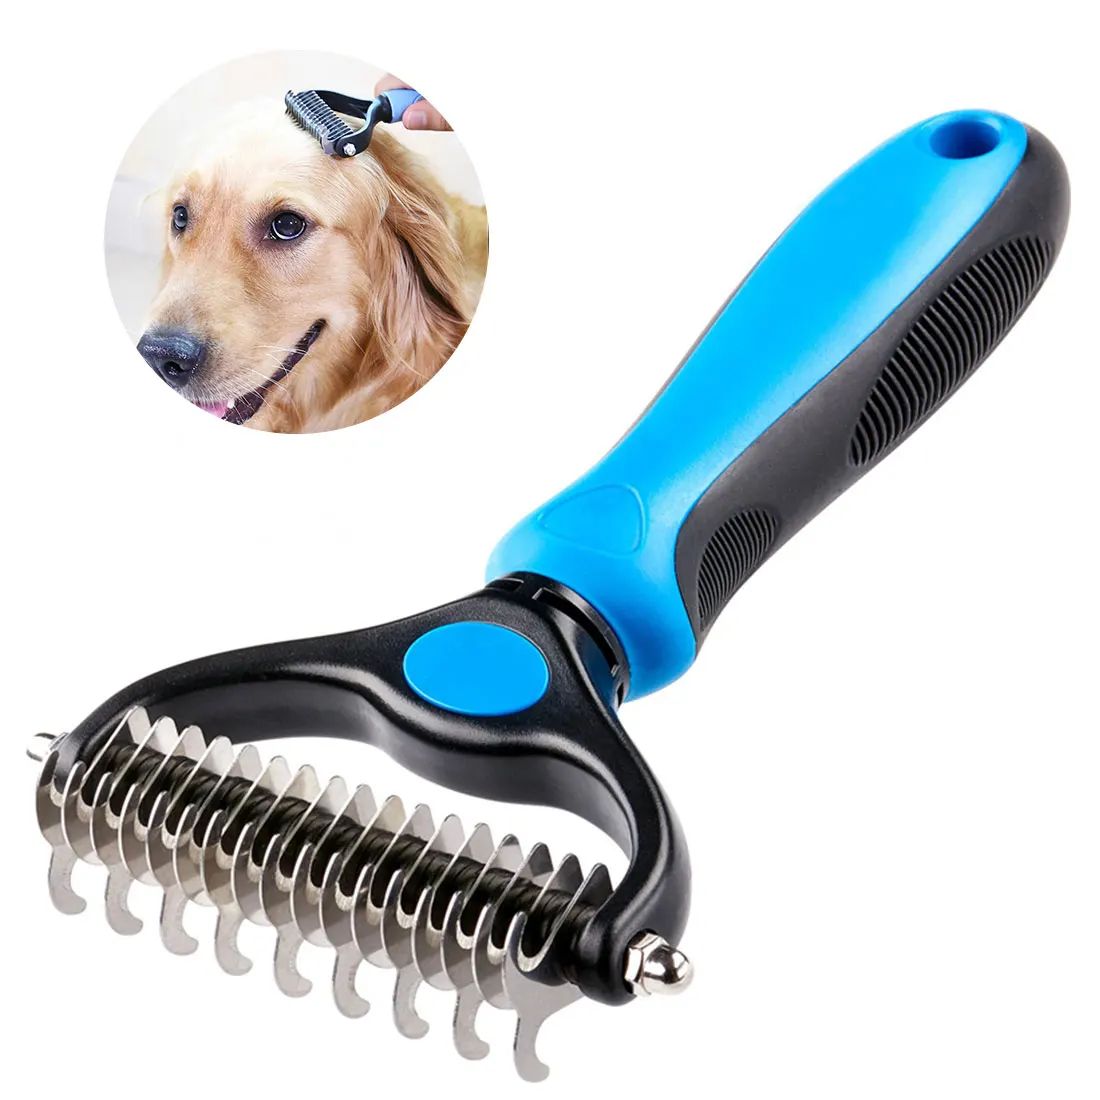 

Pet Hair Removal Comb Double Sided Blades Fur Dematting Trimmer Deshedding Brush Grooming Tool, Blue,pink